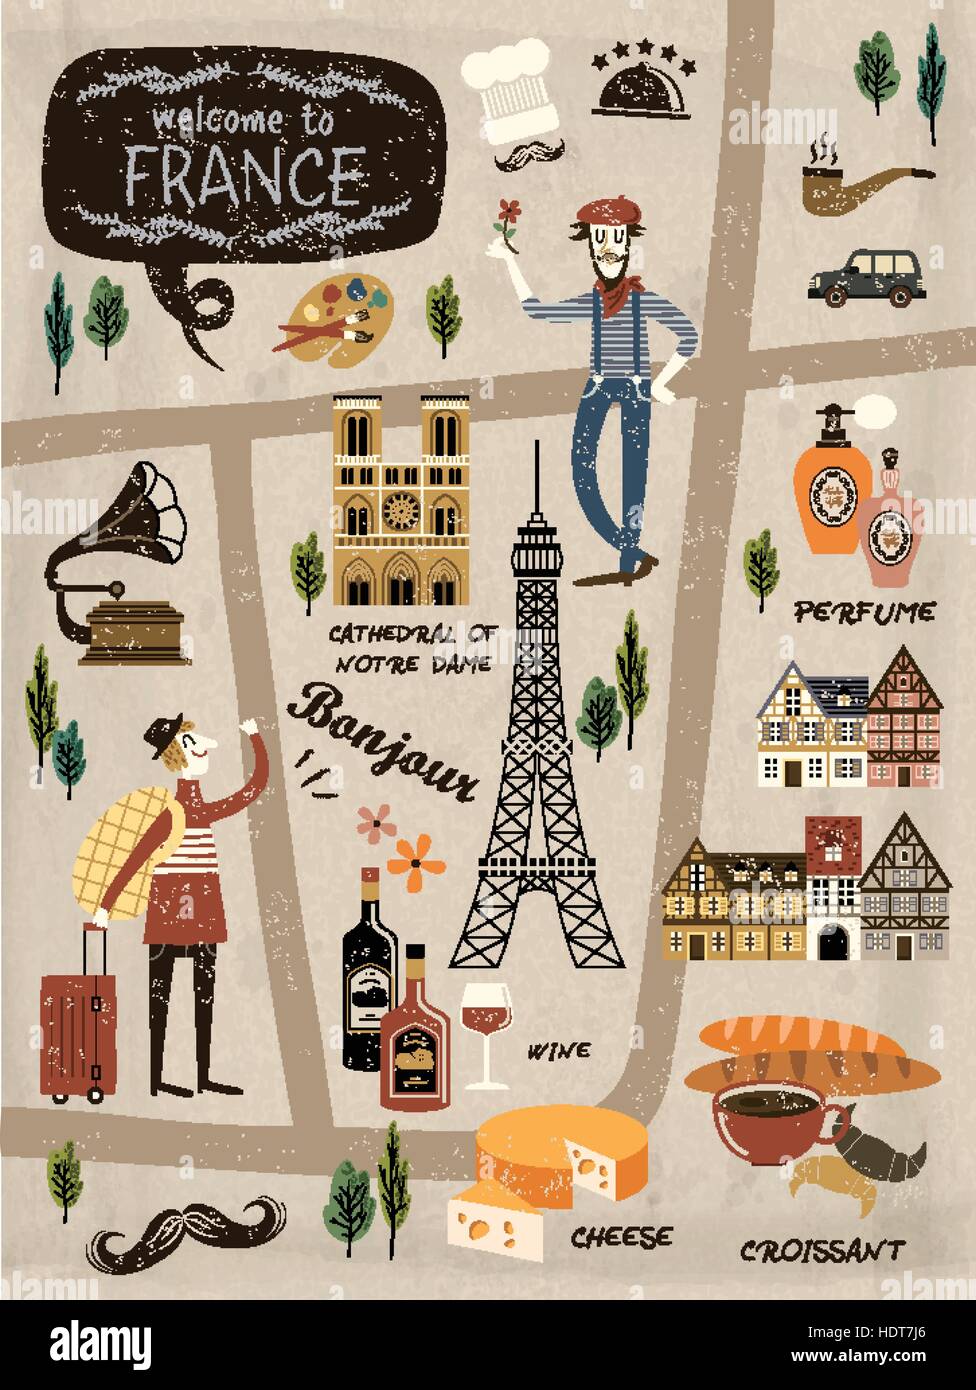 France travel concept illustration map with attractions and Stock Vector